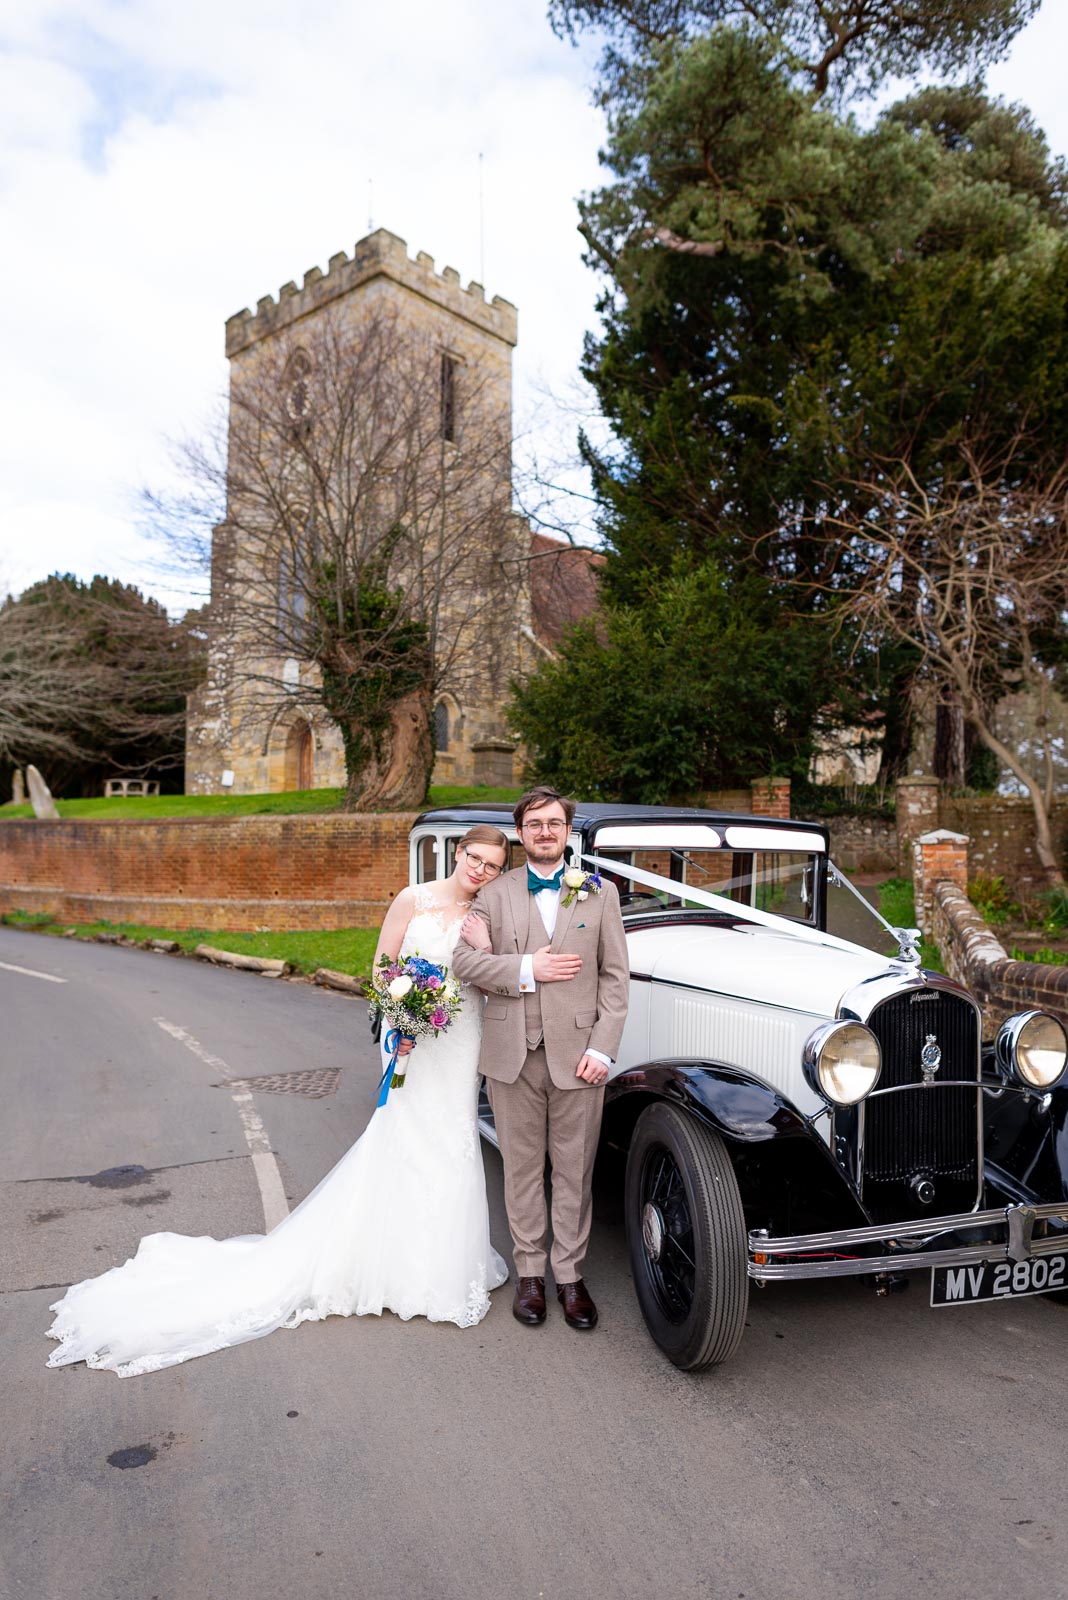 Lewis and Stephanie pose next to their wedding car outside The Church of St Peter and St Paul in Hellingly. 